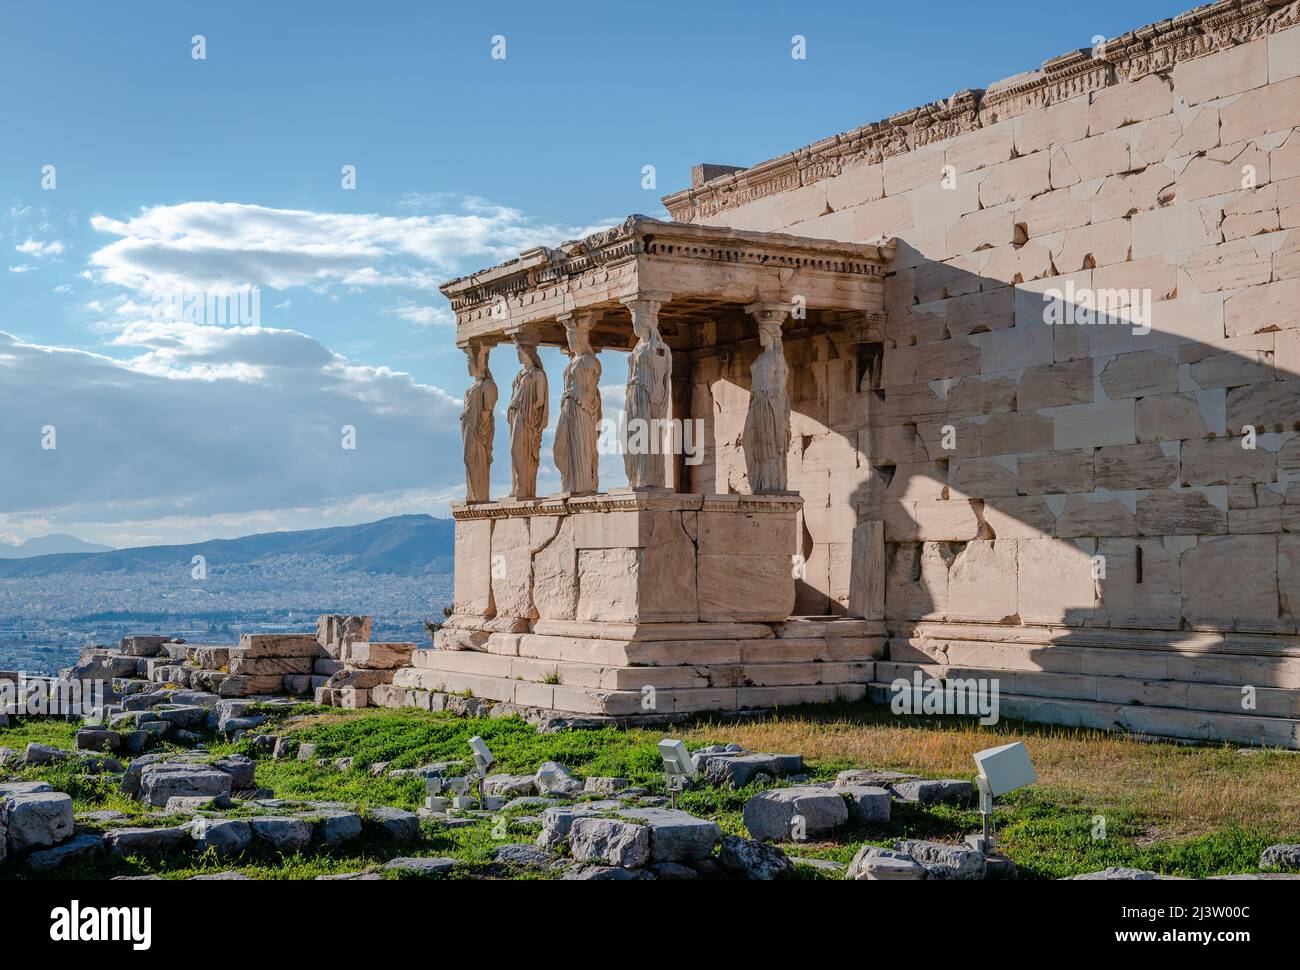 The Caryatid porch of the Erechtheion, an ancient temple dedicated to Goddess Athens on the Acropolis Hill, in Athens, Greece. Stock Photo